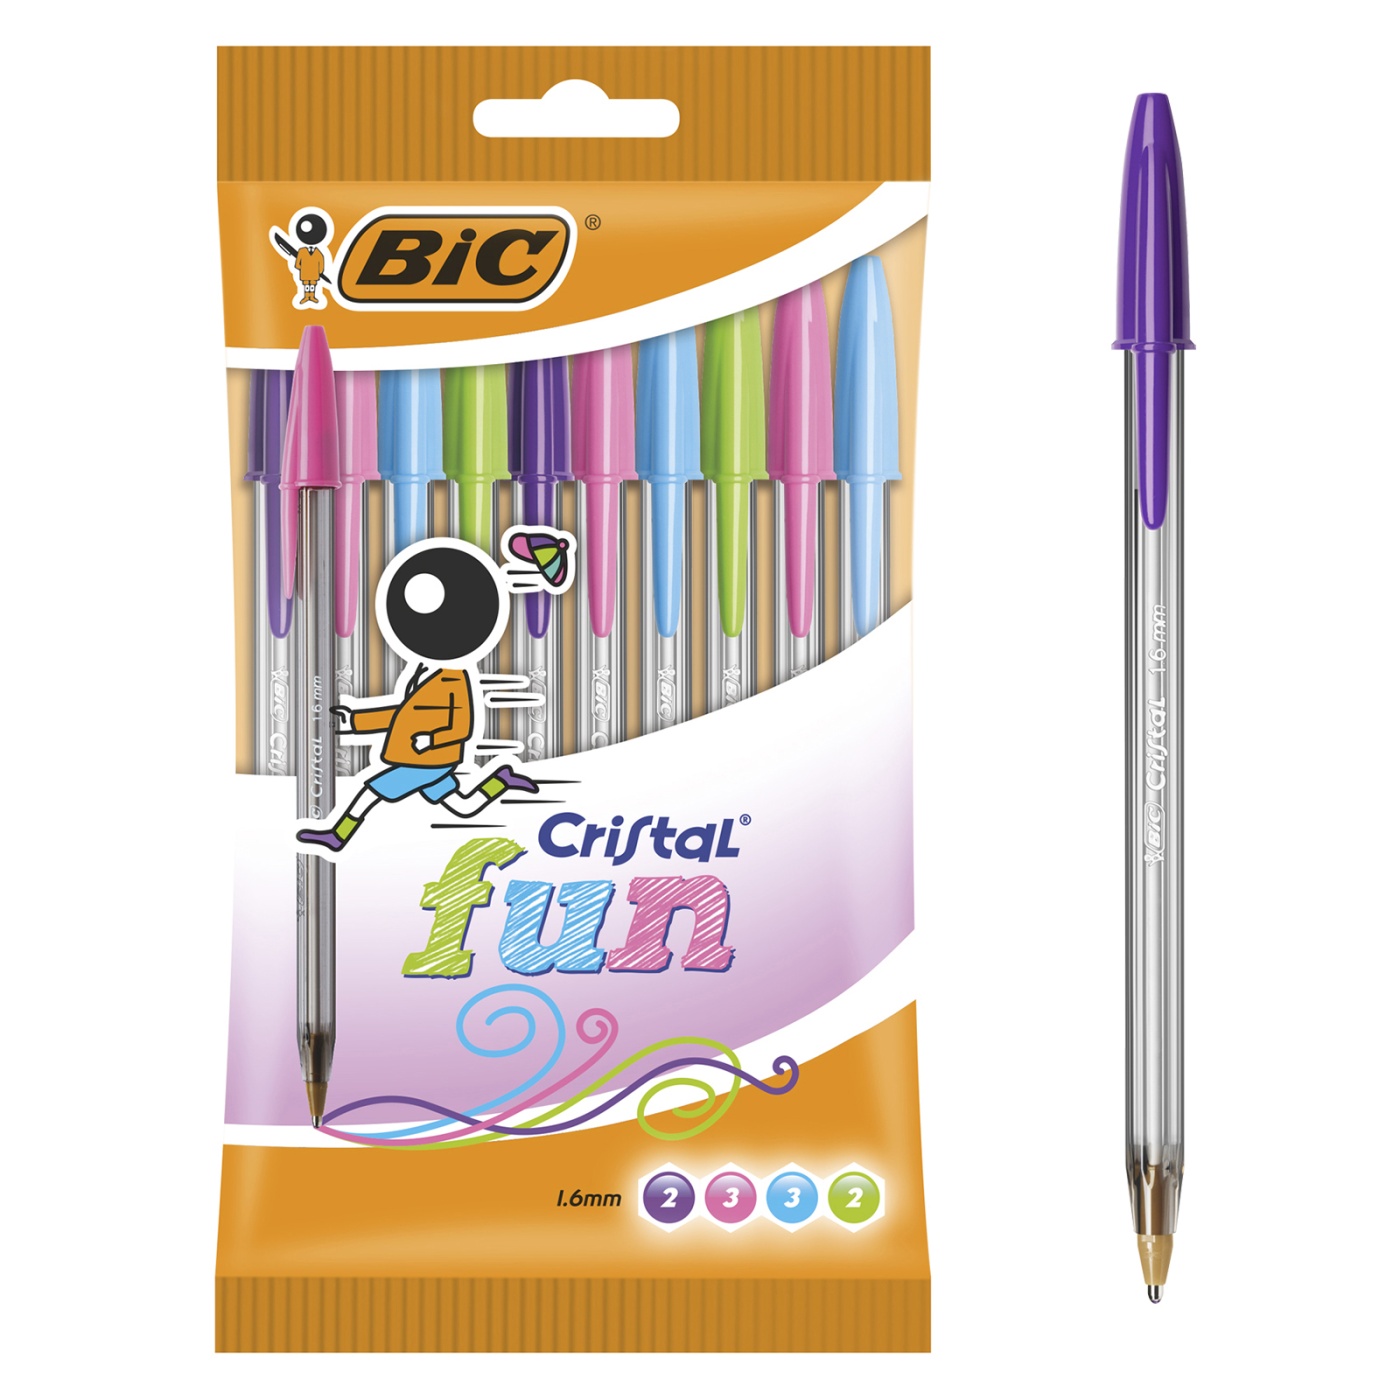 Pack of 3 & Bic Cristal Original Smudge- Free Ballpoint Pens with Medium Point Lined A5 Notebook Pack of 10 Oxford Campus 1.0 mm Assorted Colours 140 Page Black